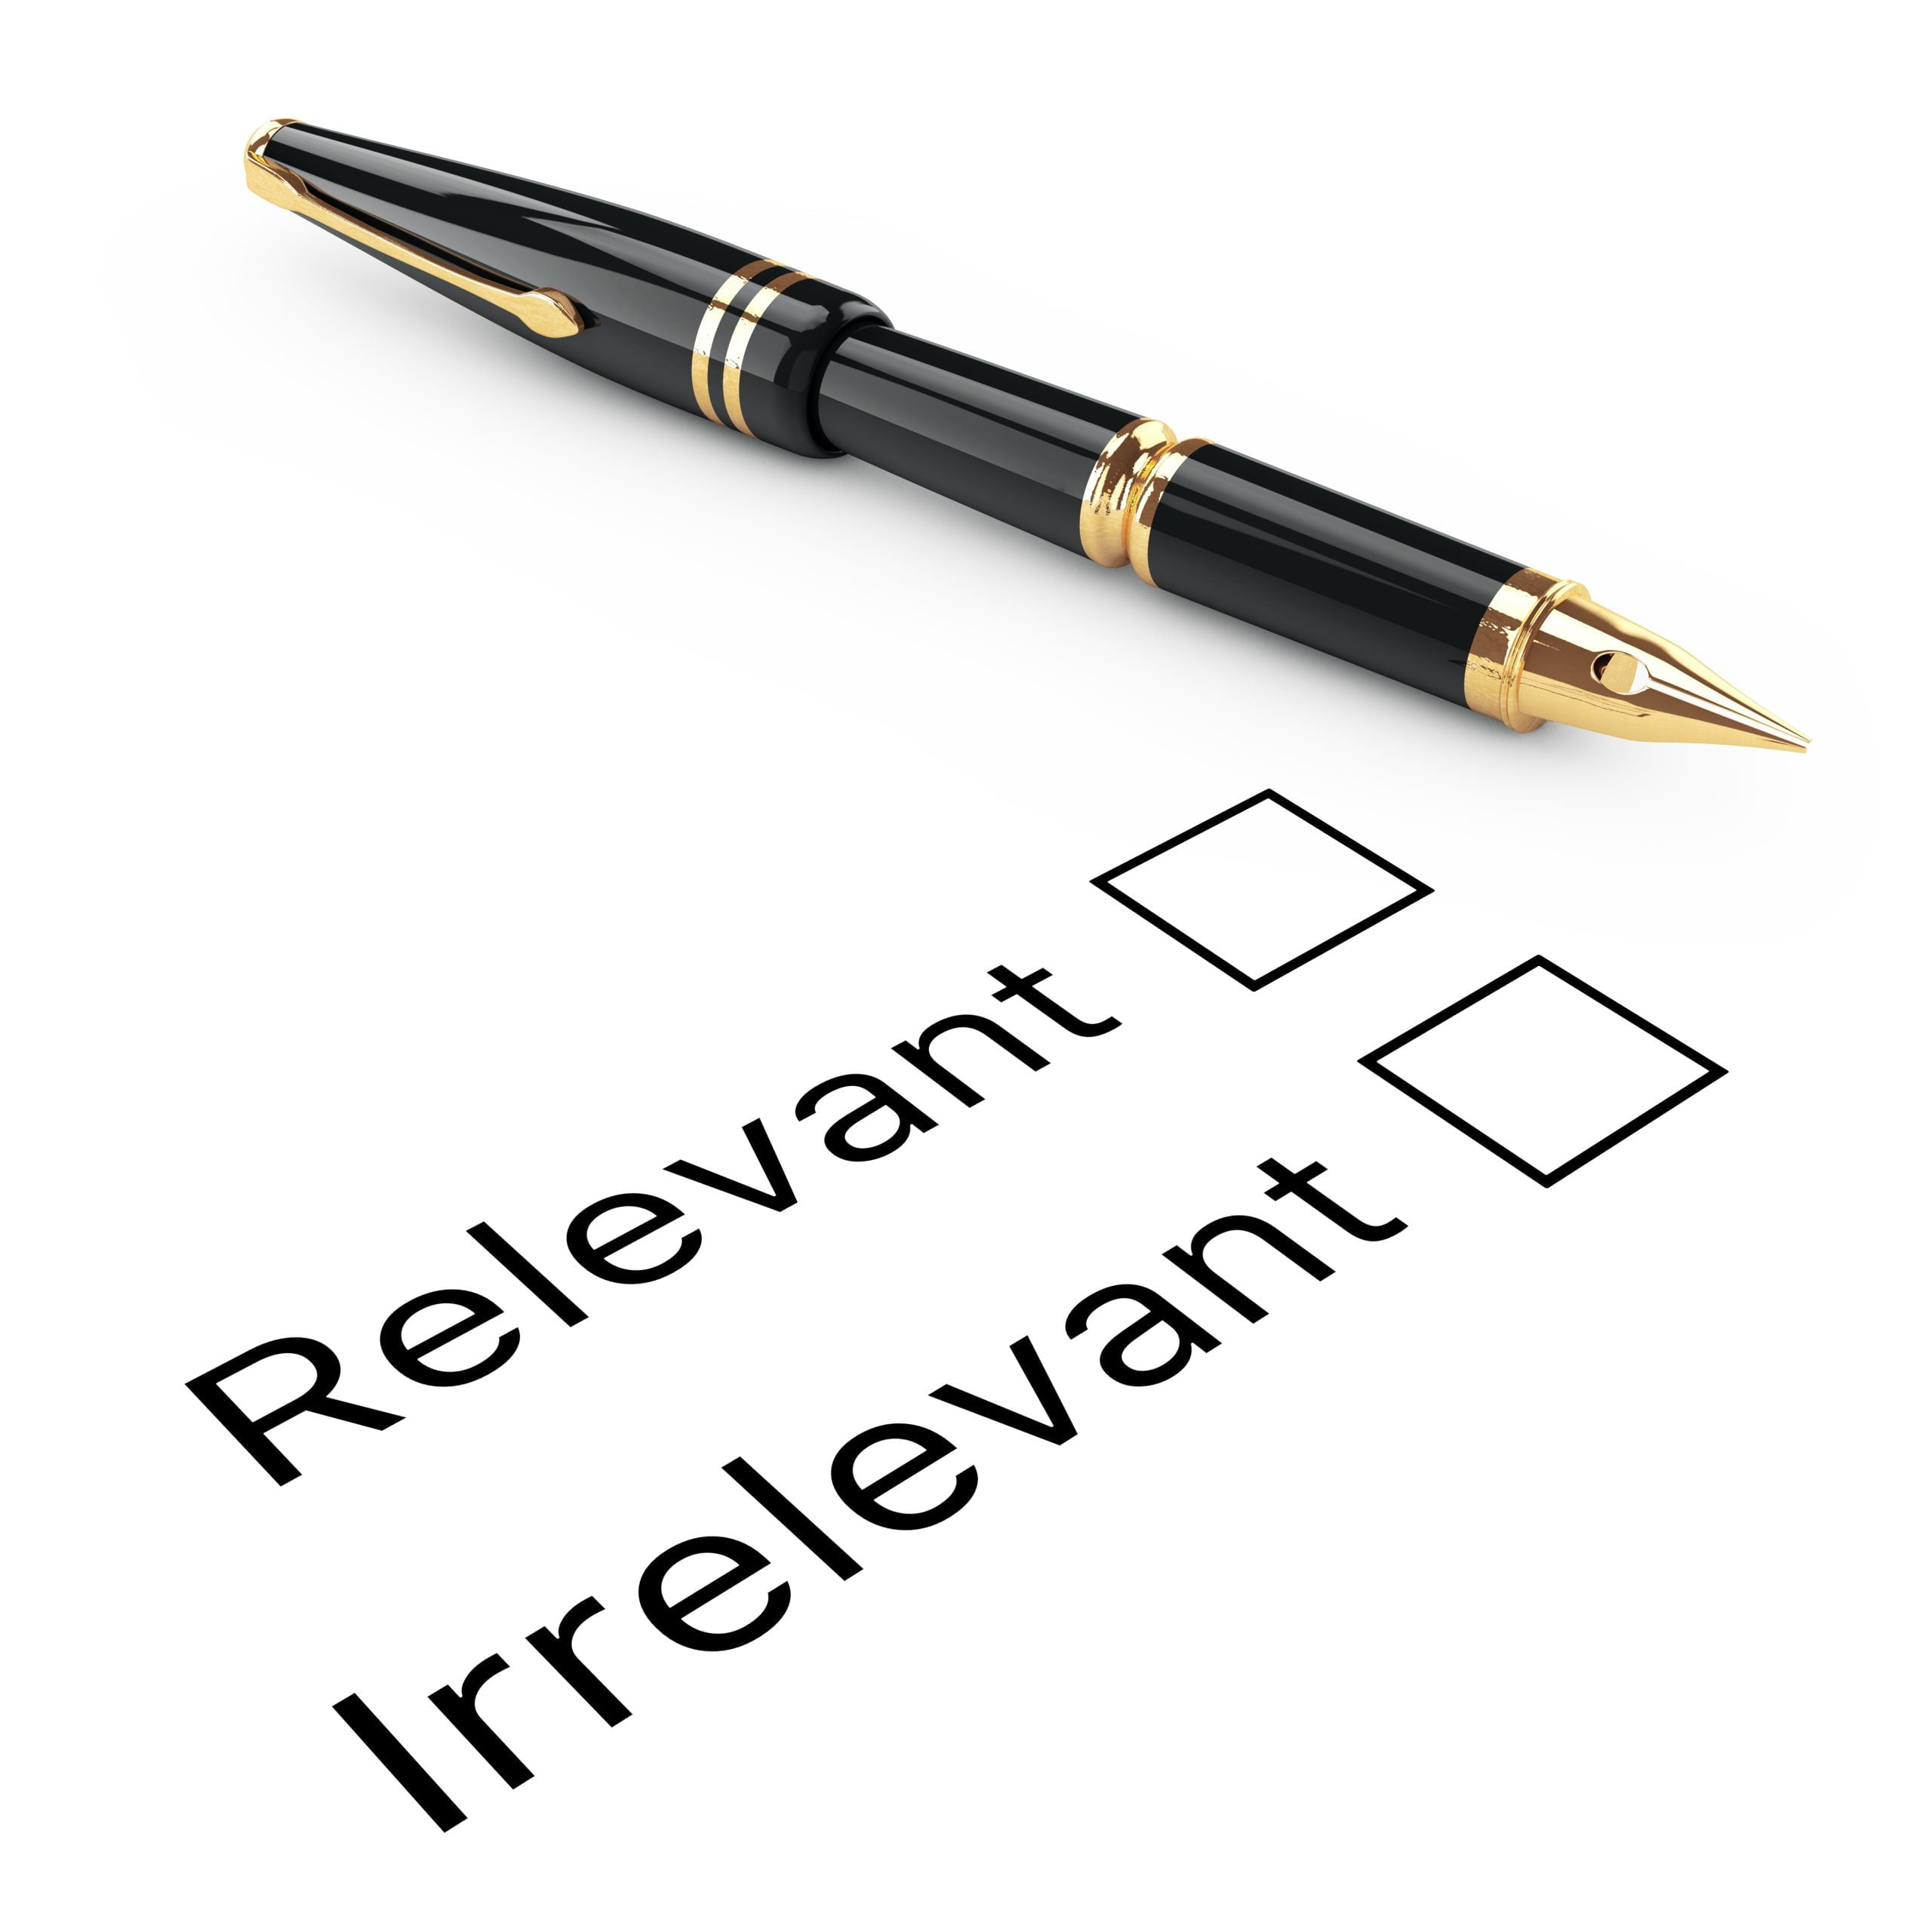 Relevant or irrelevant checklist with fountain pen